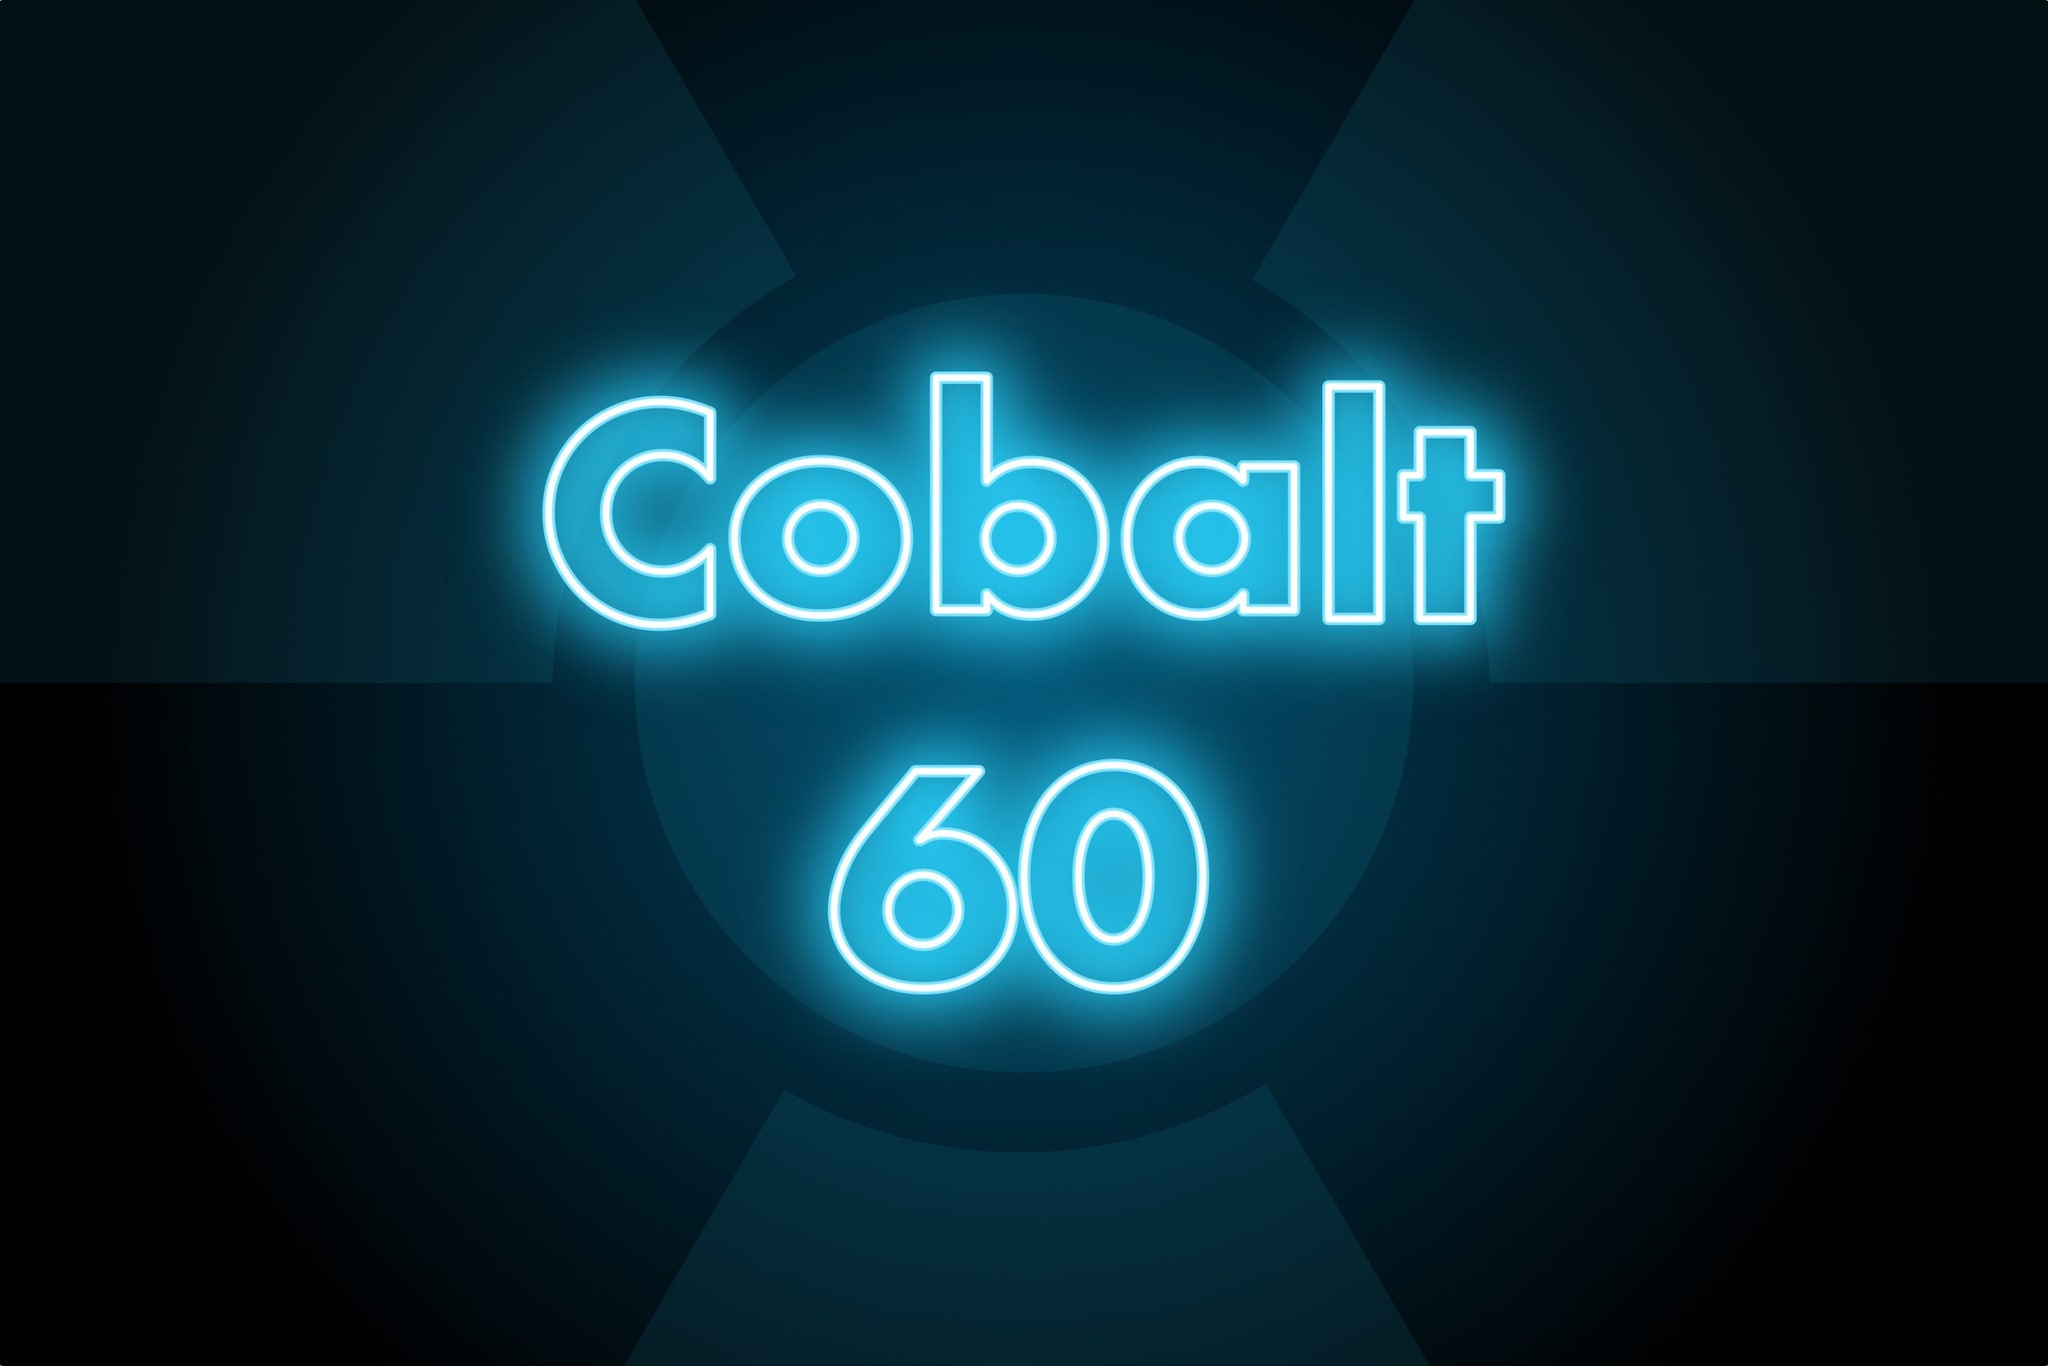 Graphic displaying the word "Cobalt 60" in neon blue font